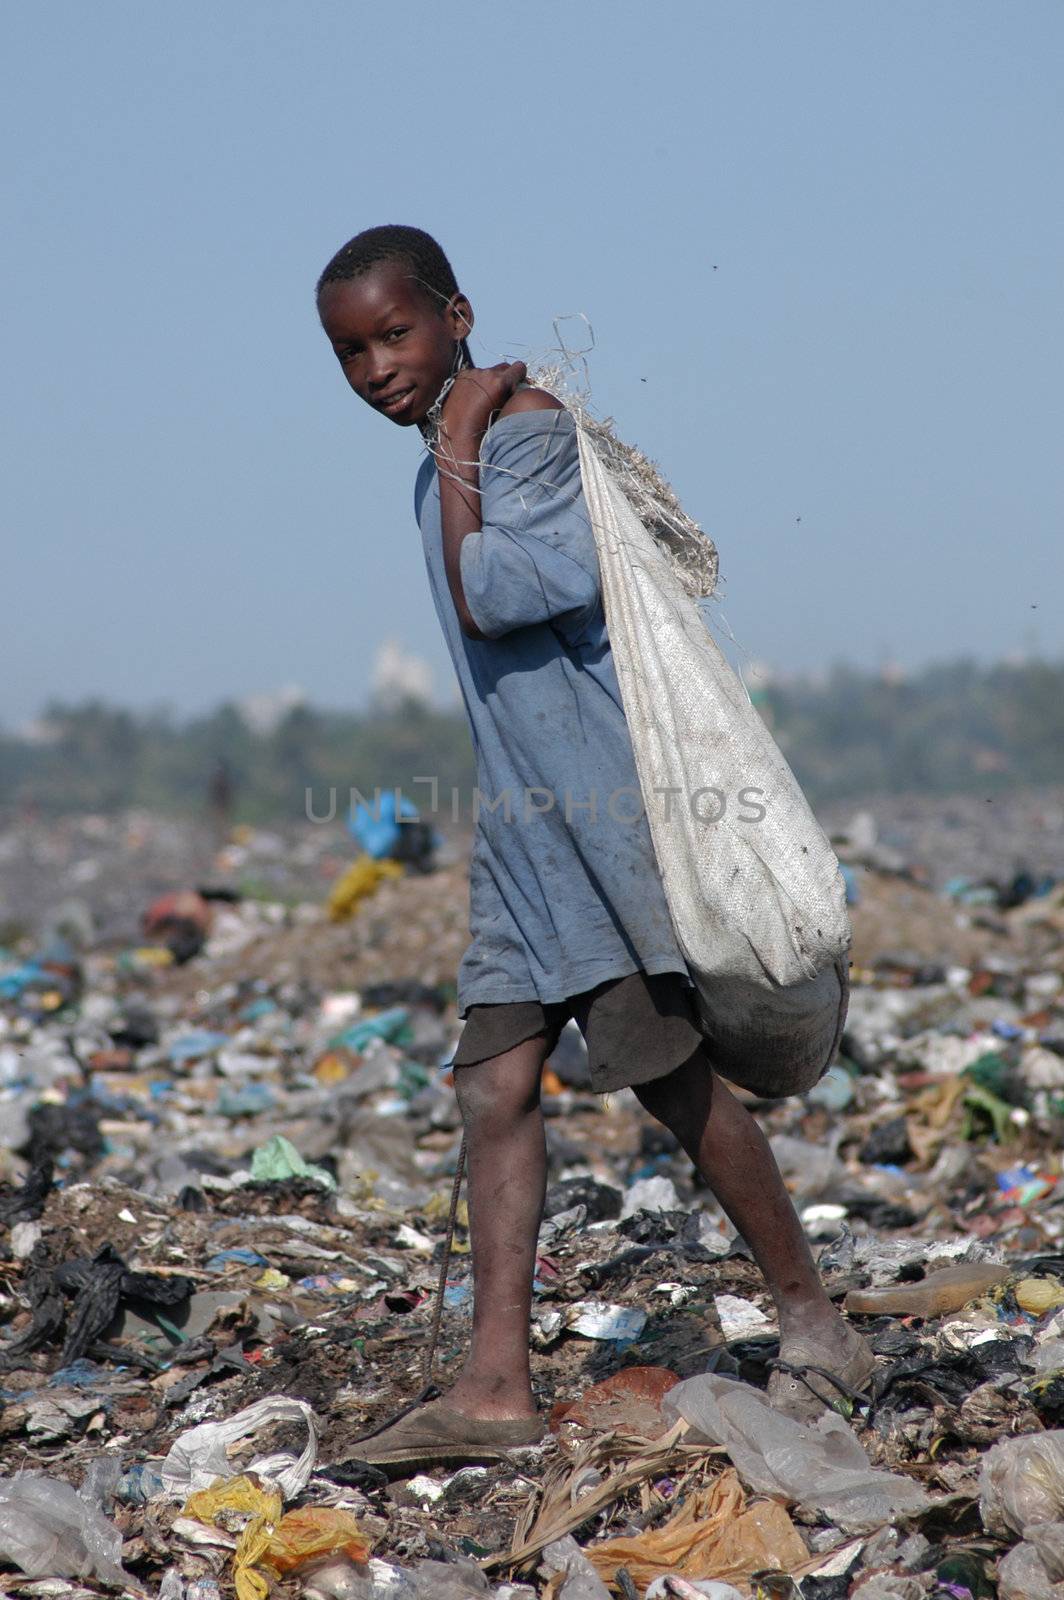 Maputo, Mozambique - May 14, 2004: a poor child in the landfill capital of Maputo in Mozambique. There are many street children in the garbage looking for food, bottles, Latin iron to resell